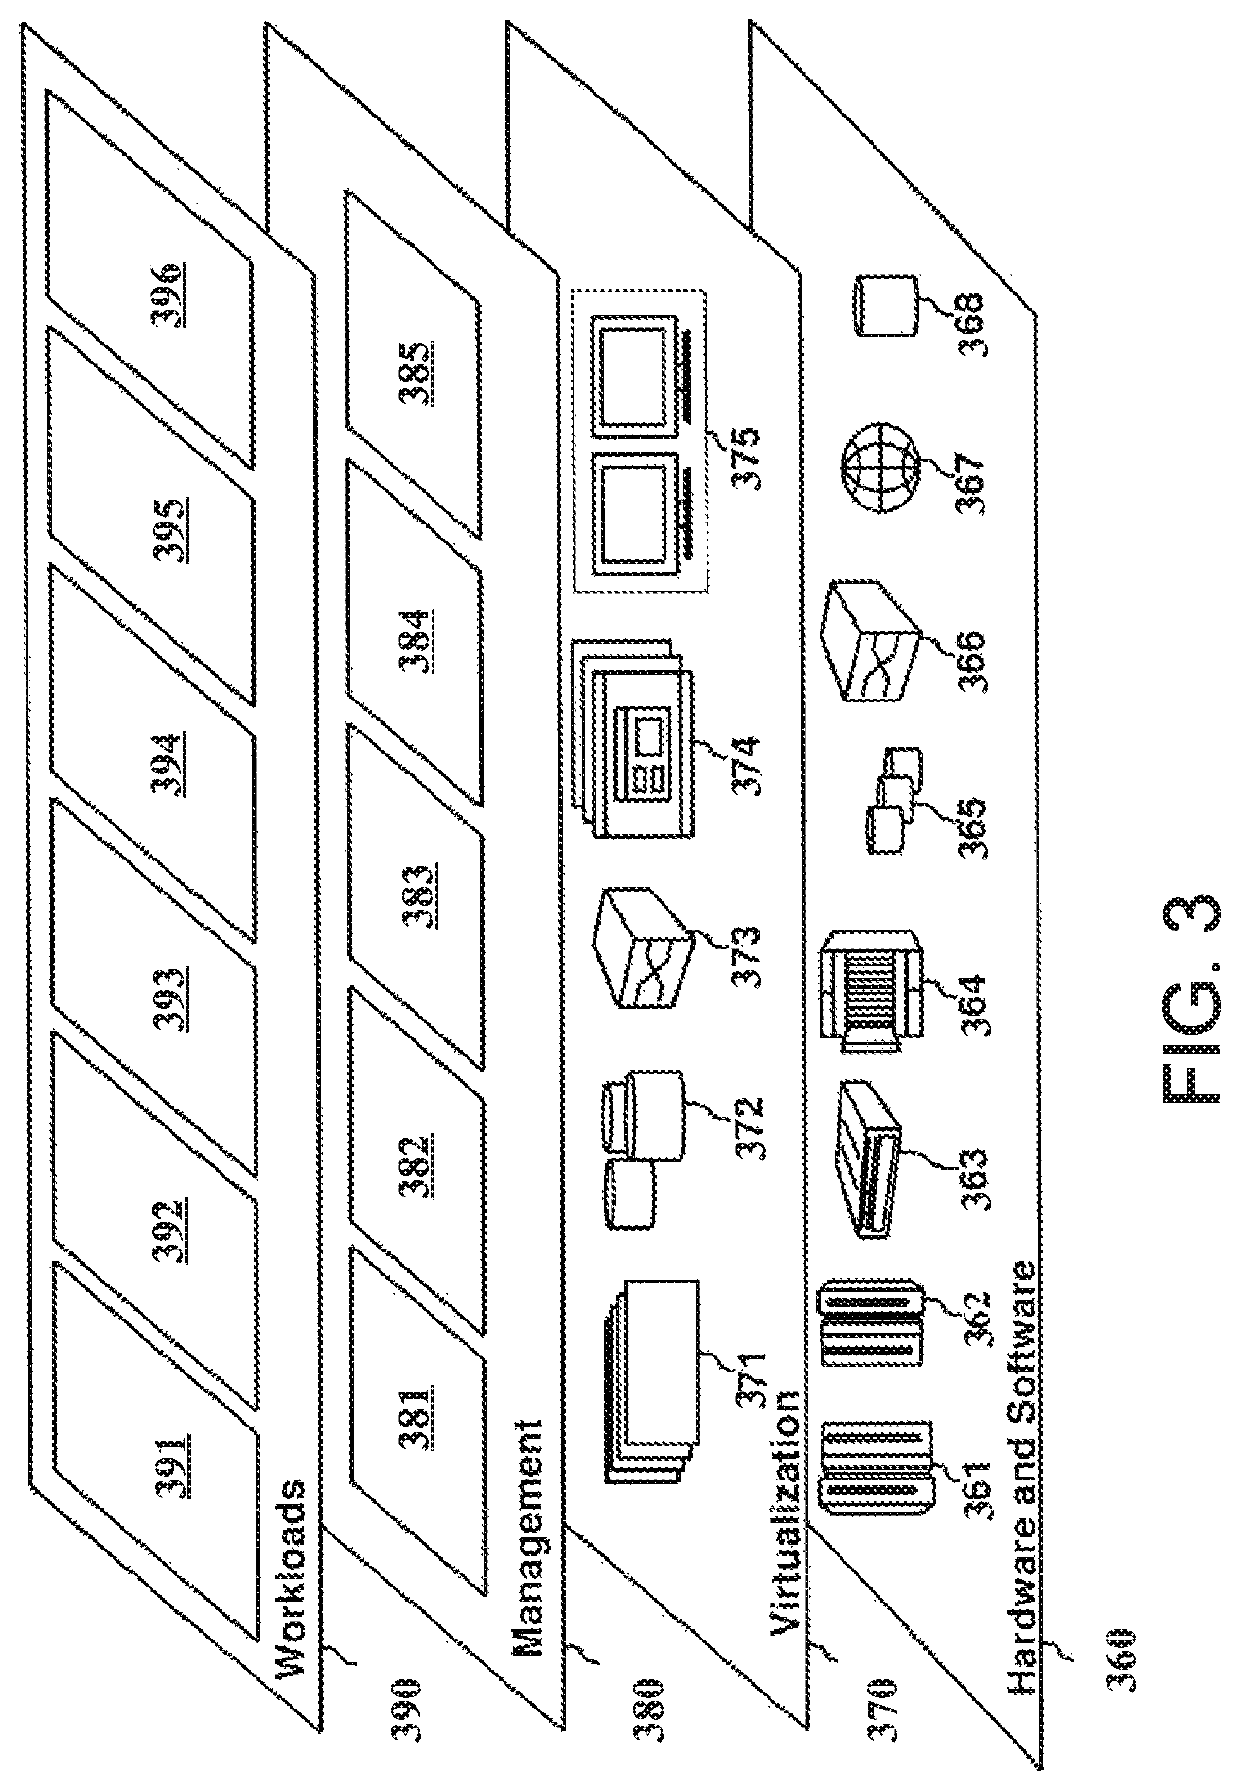 Implementing cognitive state recognition within a telematics system